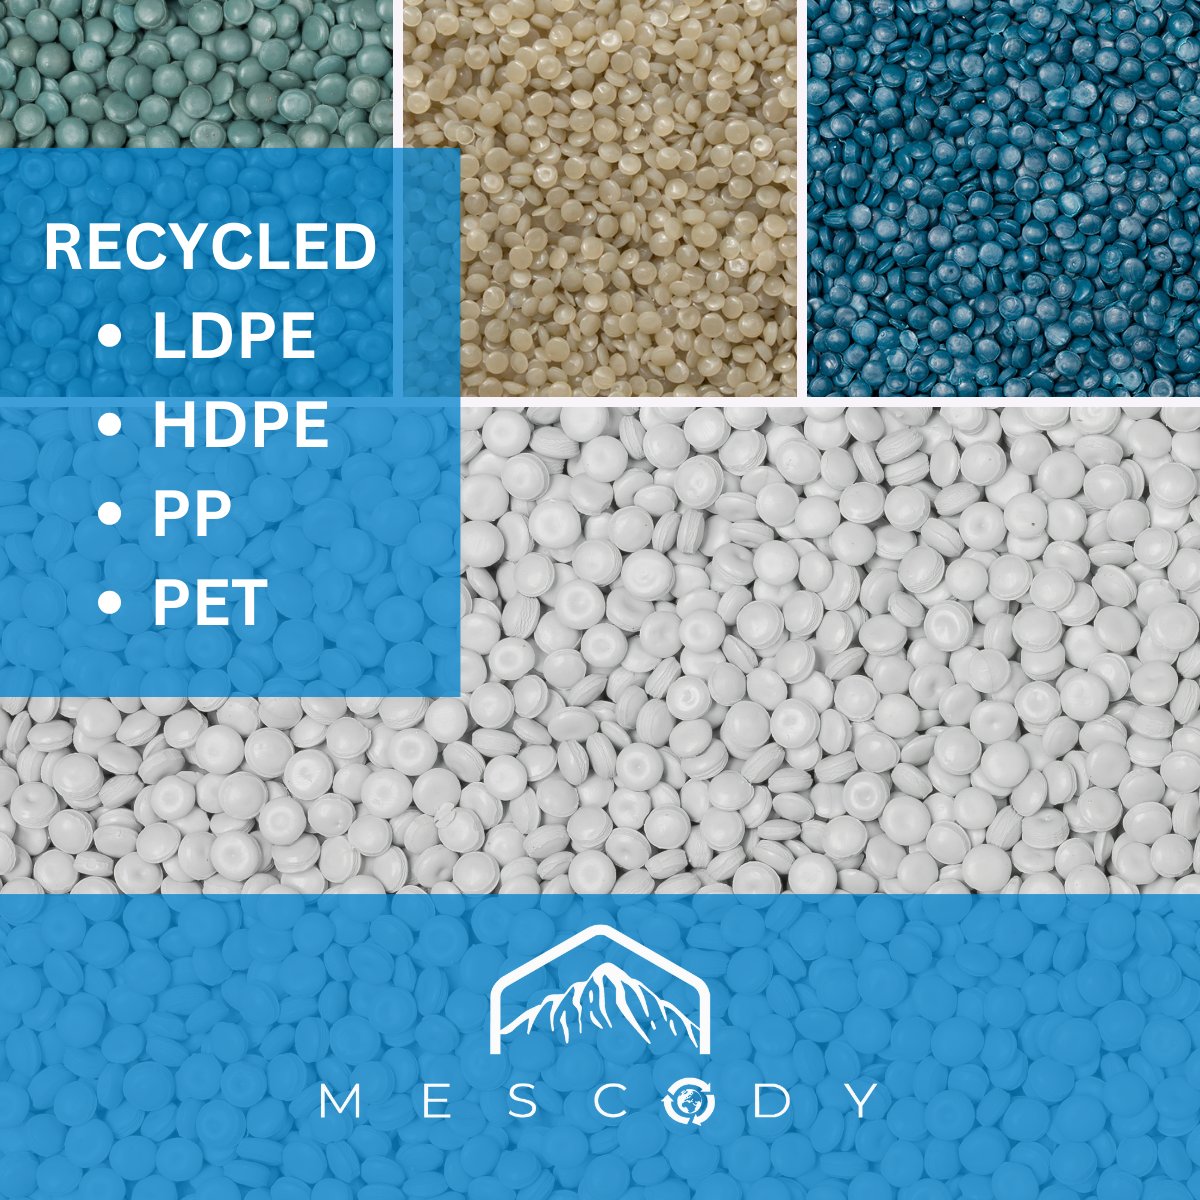 At Mescody SA, sustainability is woven into the core of our business. We're excited to offer a range of recycled materials - LDPE, HDPE, PP, and PET - to support a greener future. #MescodySA #RecycledMaterials #Sustainability #AffordableSolutions #Innovation #GreenFuture